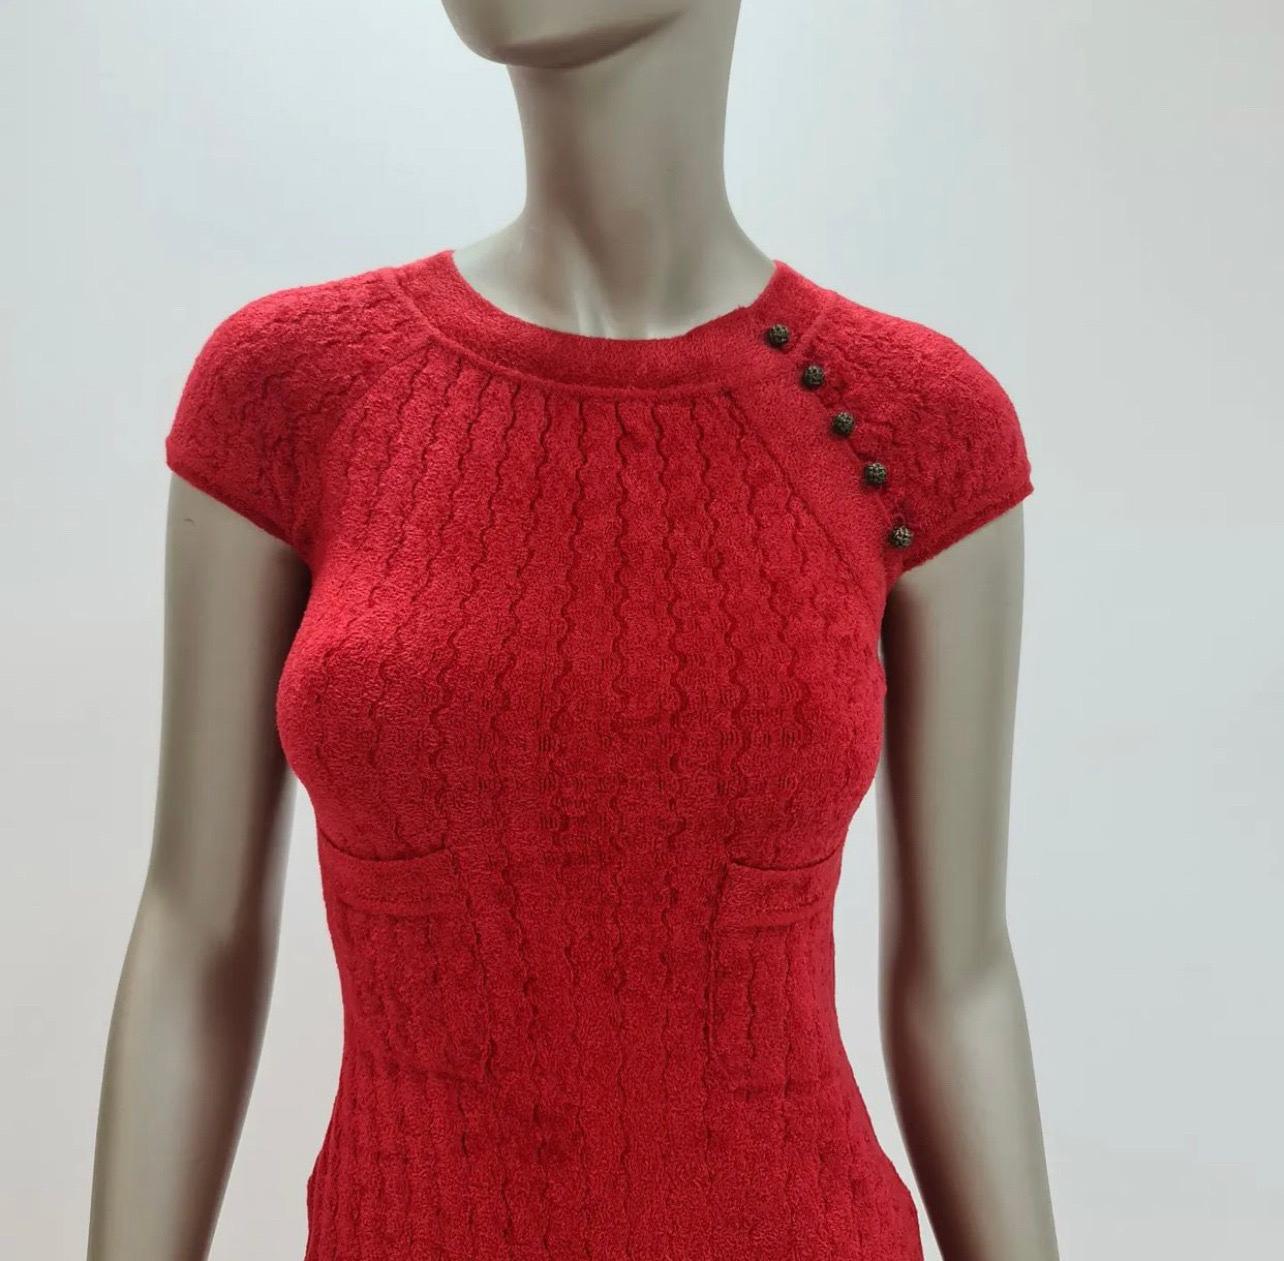 100% authentic Chanel Metiers D'Art 2010 Paris-Shanghai knit dress in red viscose (63%) and poliamid (27%). 
Opens with five 'CC' buttons on the front.
Unlined.
Sz.36

Very good condition.